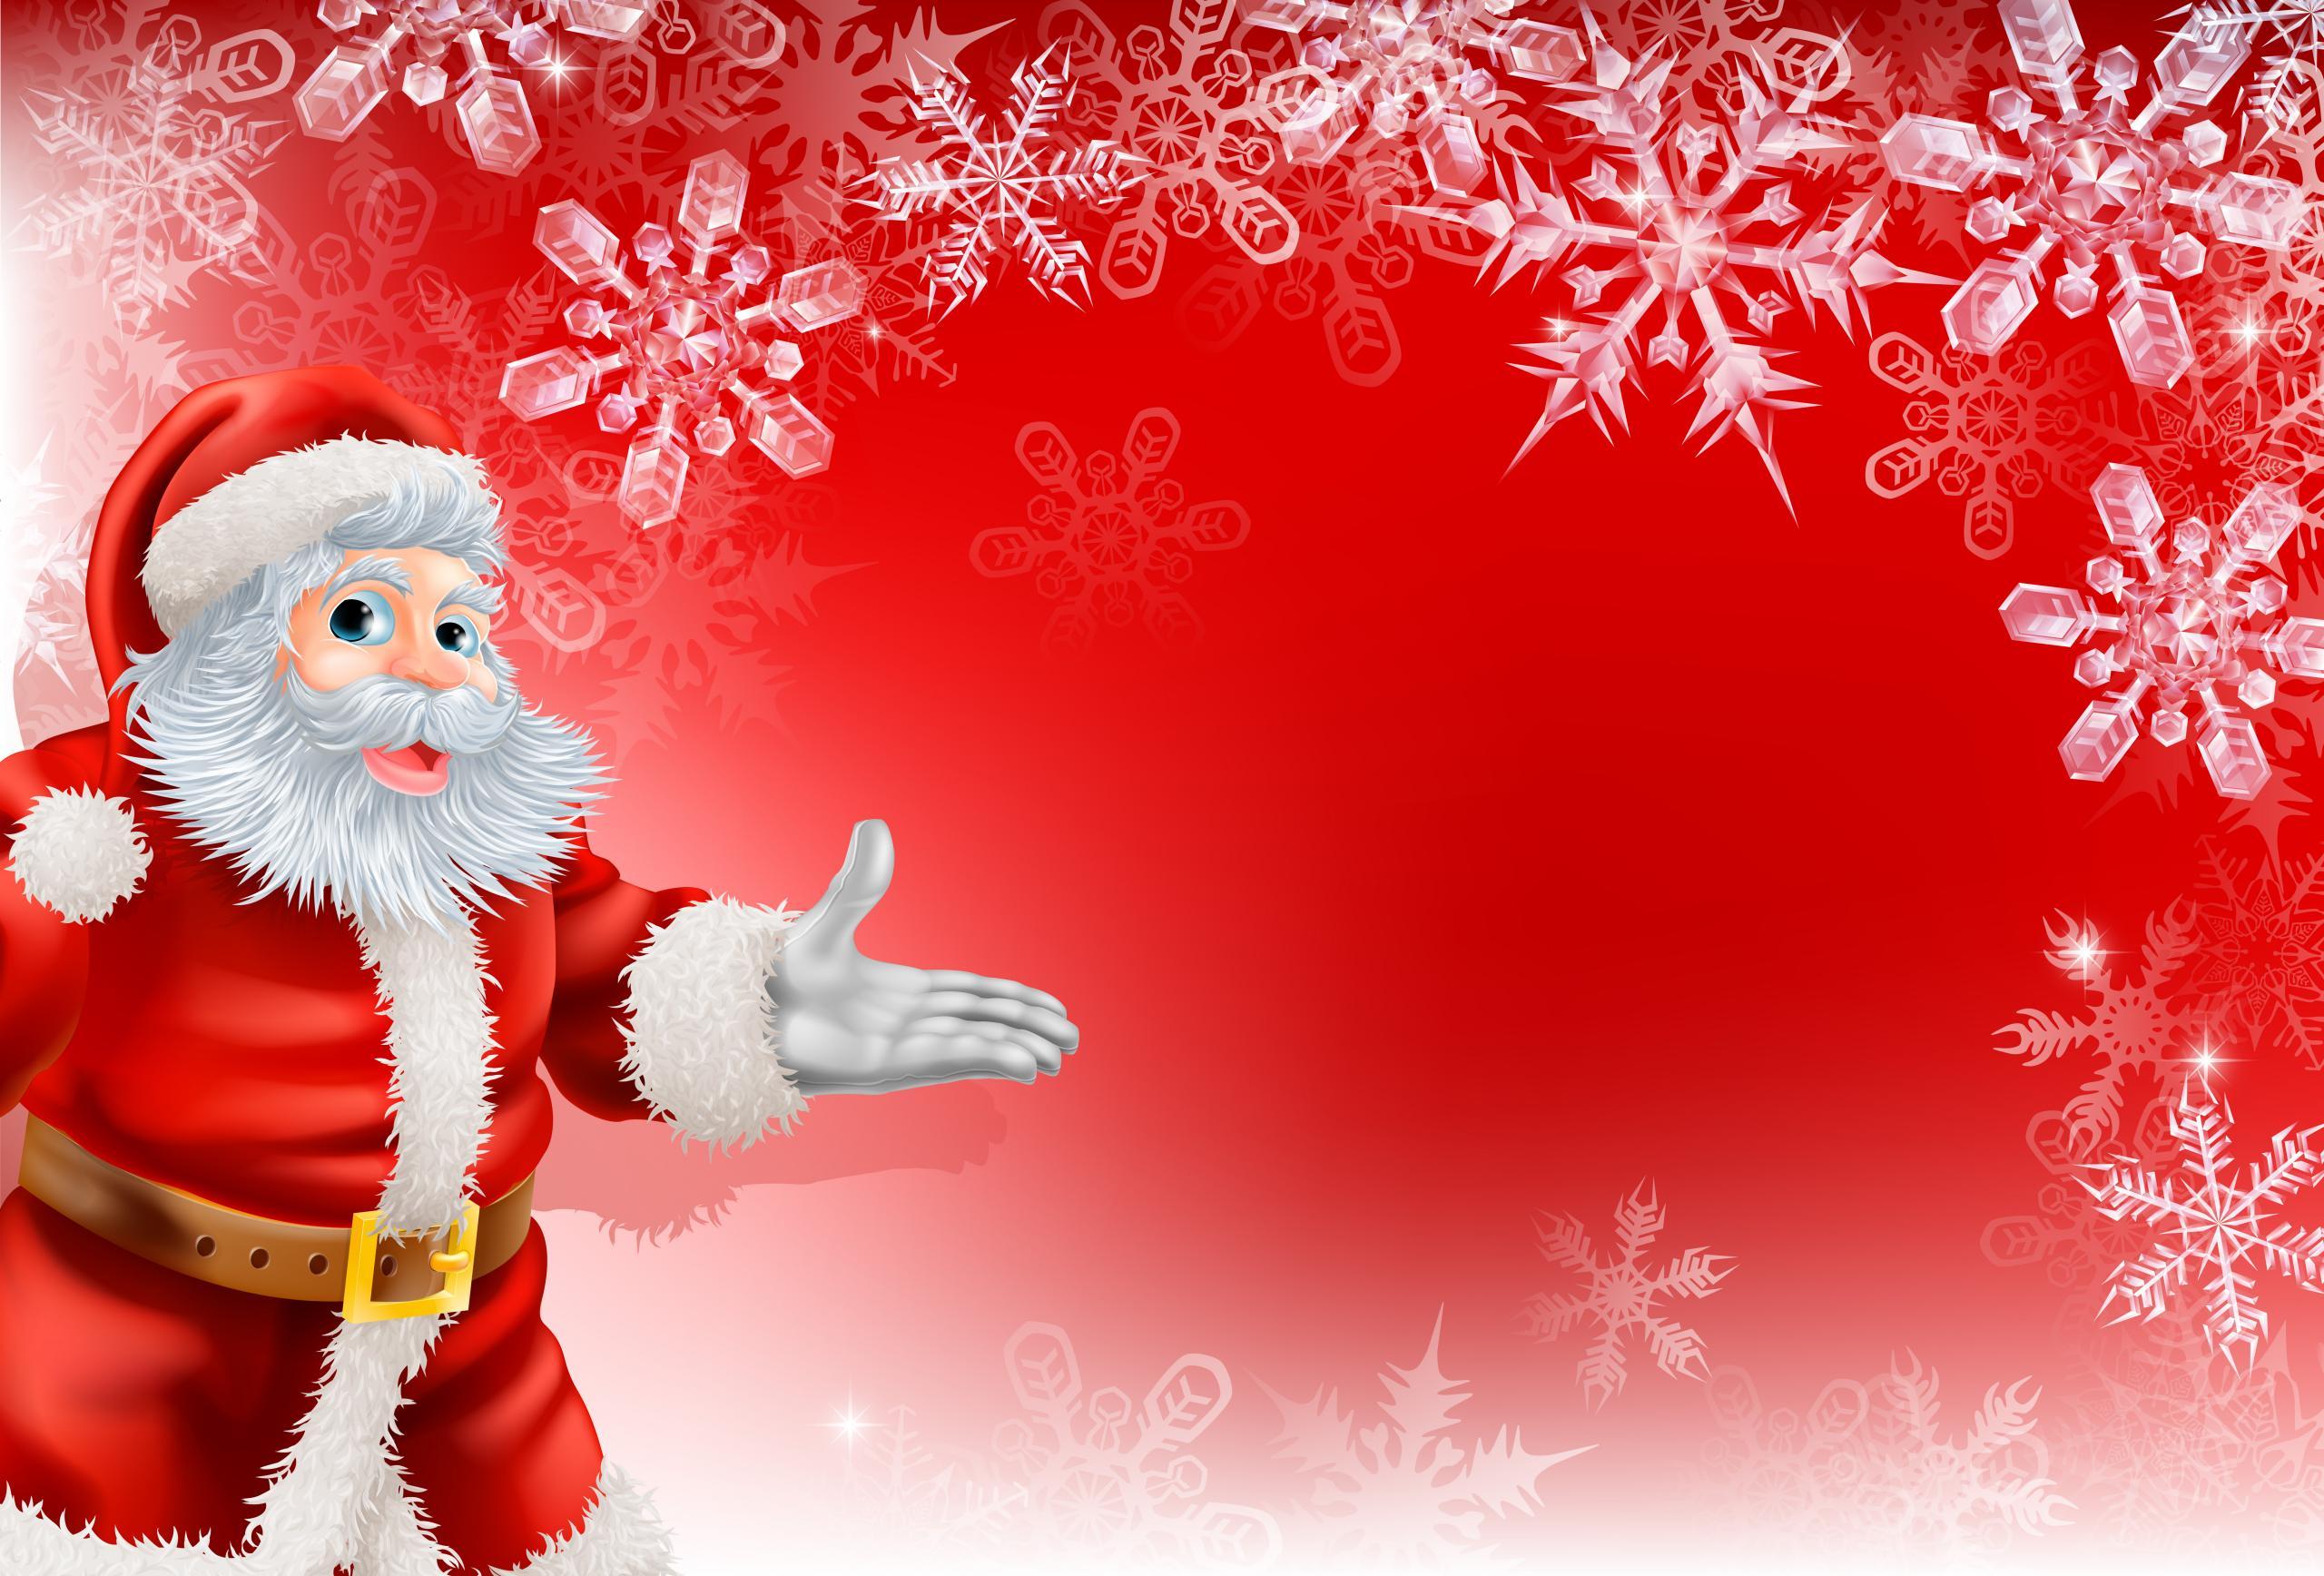 Christmas Santa Claus Wallpaper HD Pictures One